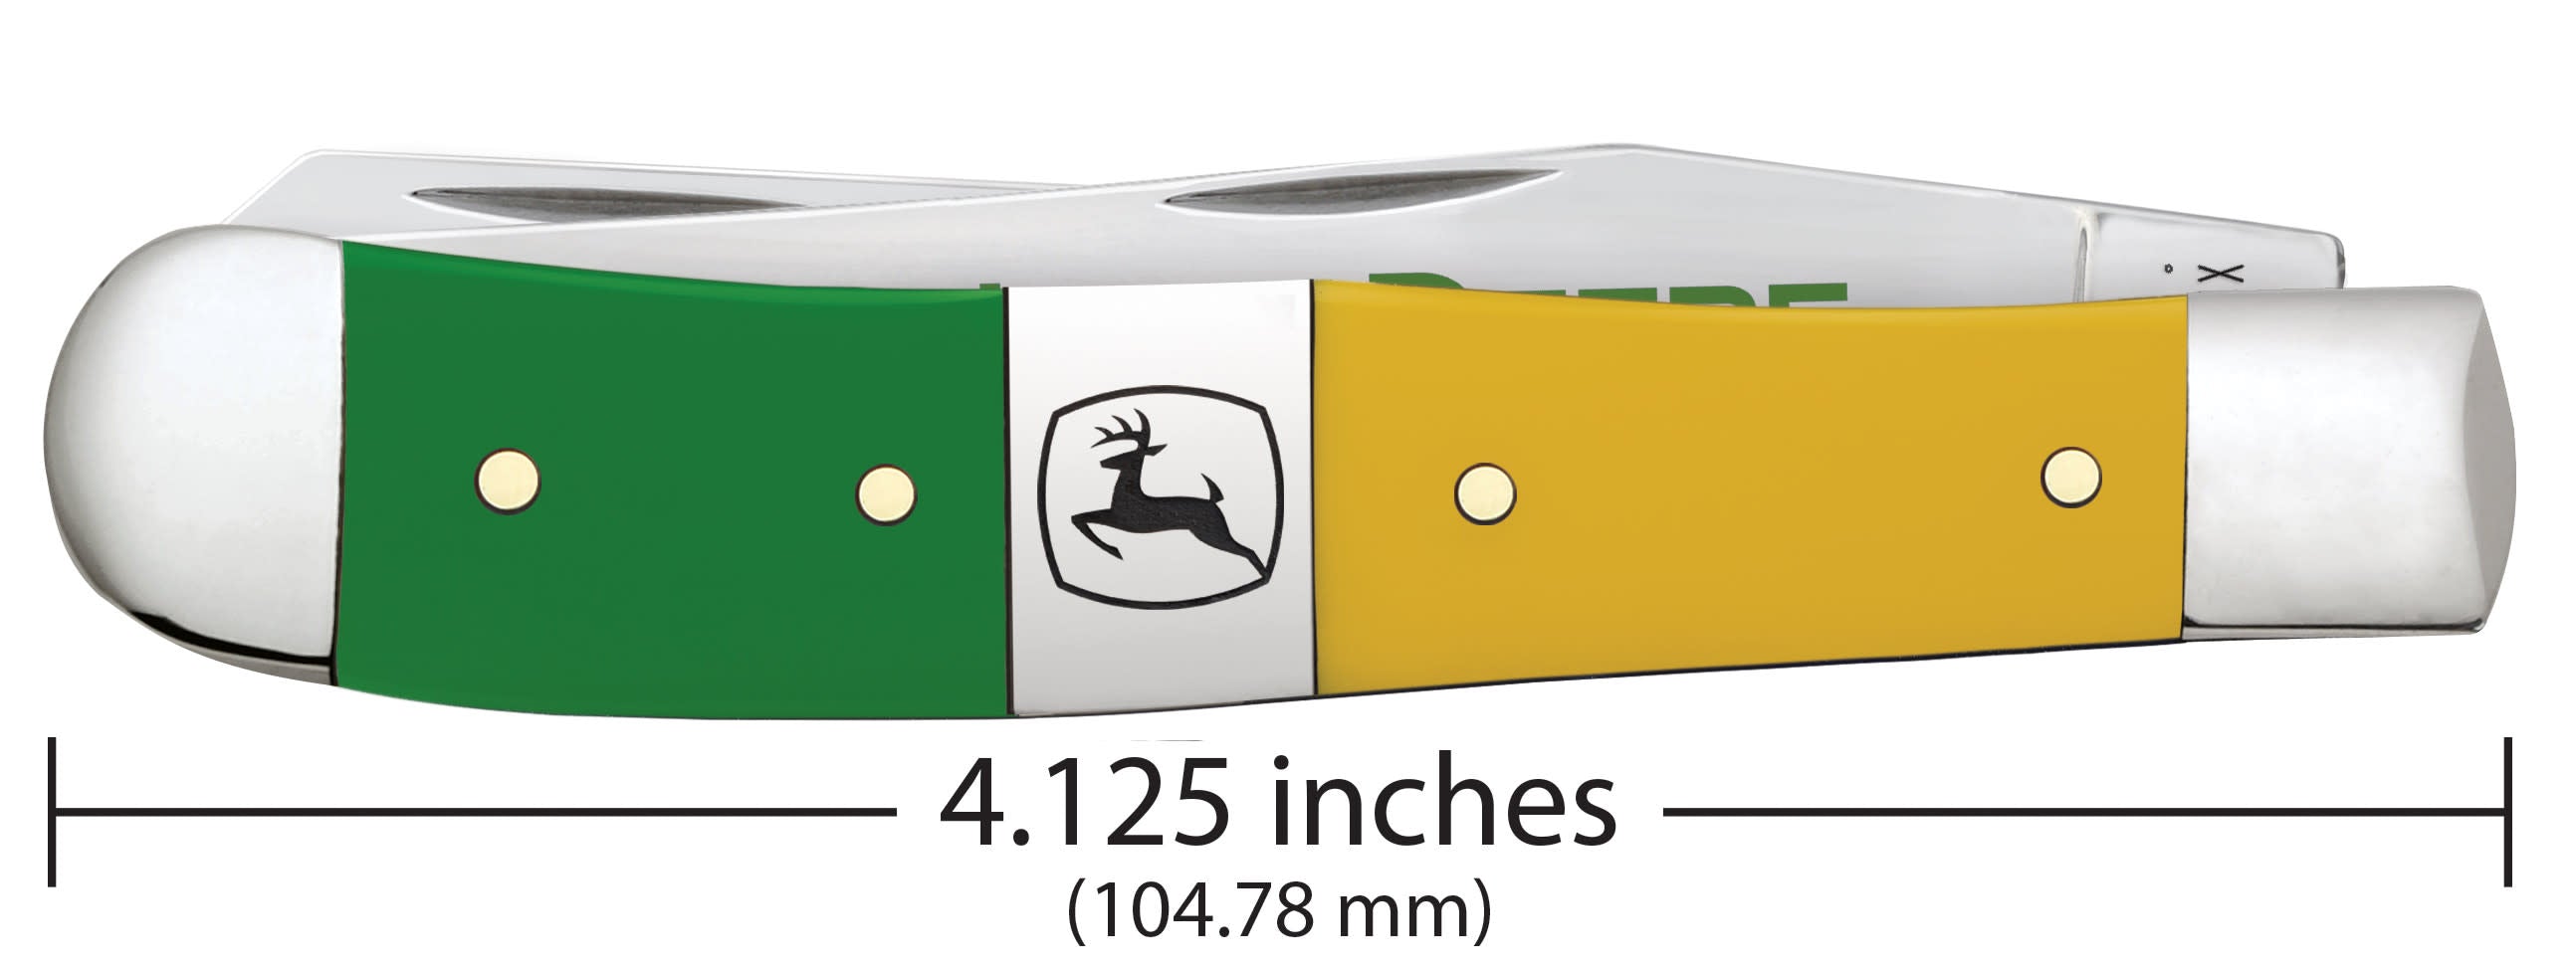 John Deere Smooth Green & Yellow Synthetic Trapper Knife Dimensions